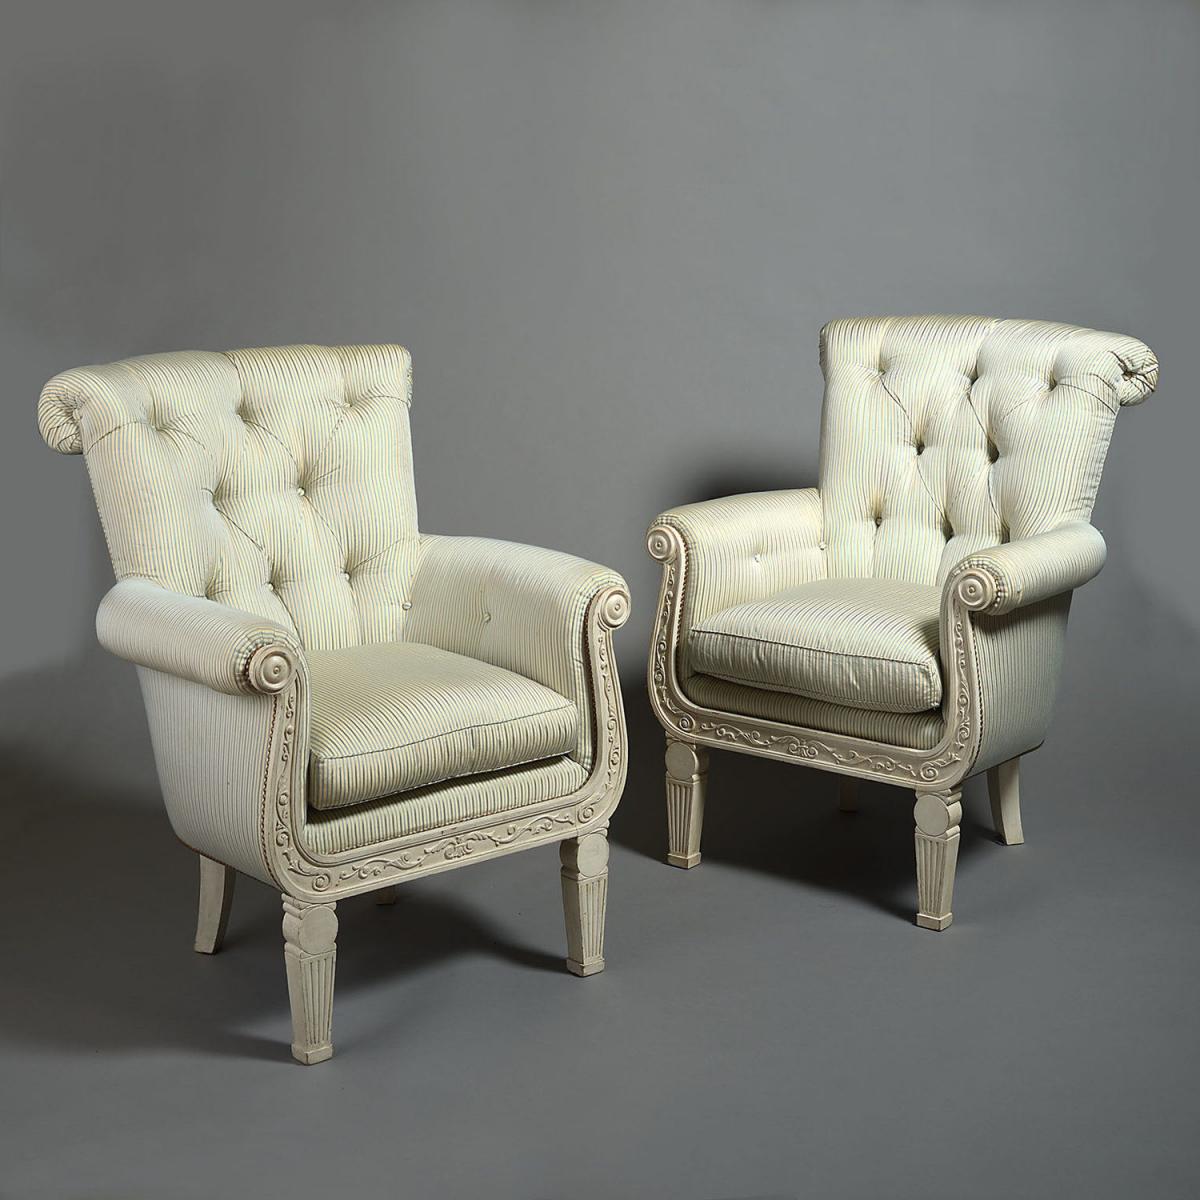 A Pair of Overscale Painted Armchairs